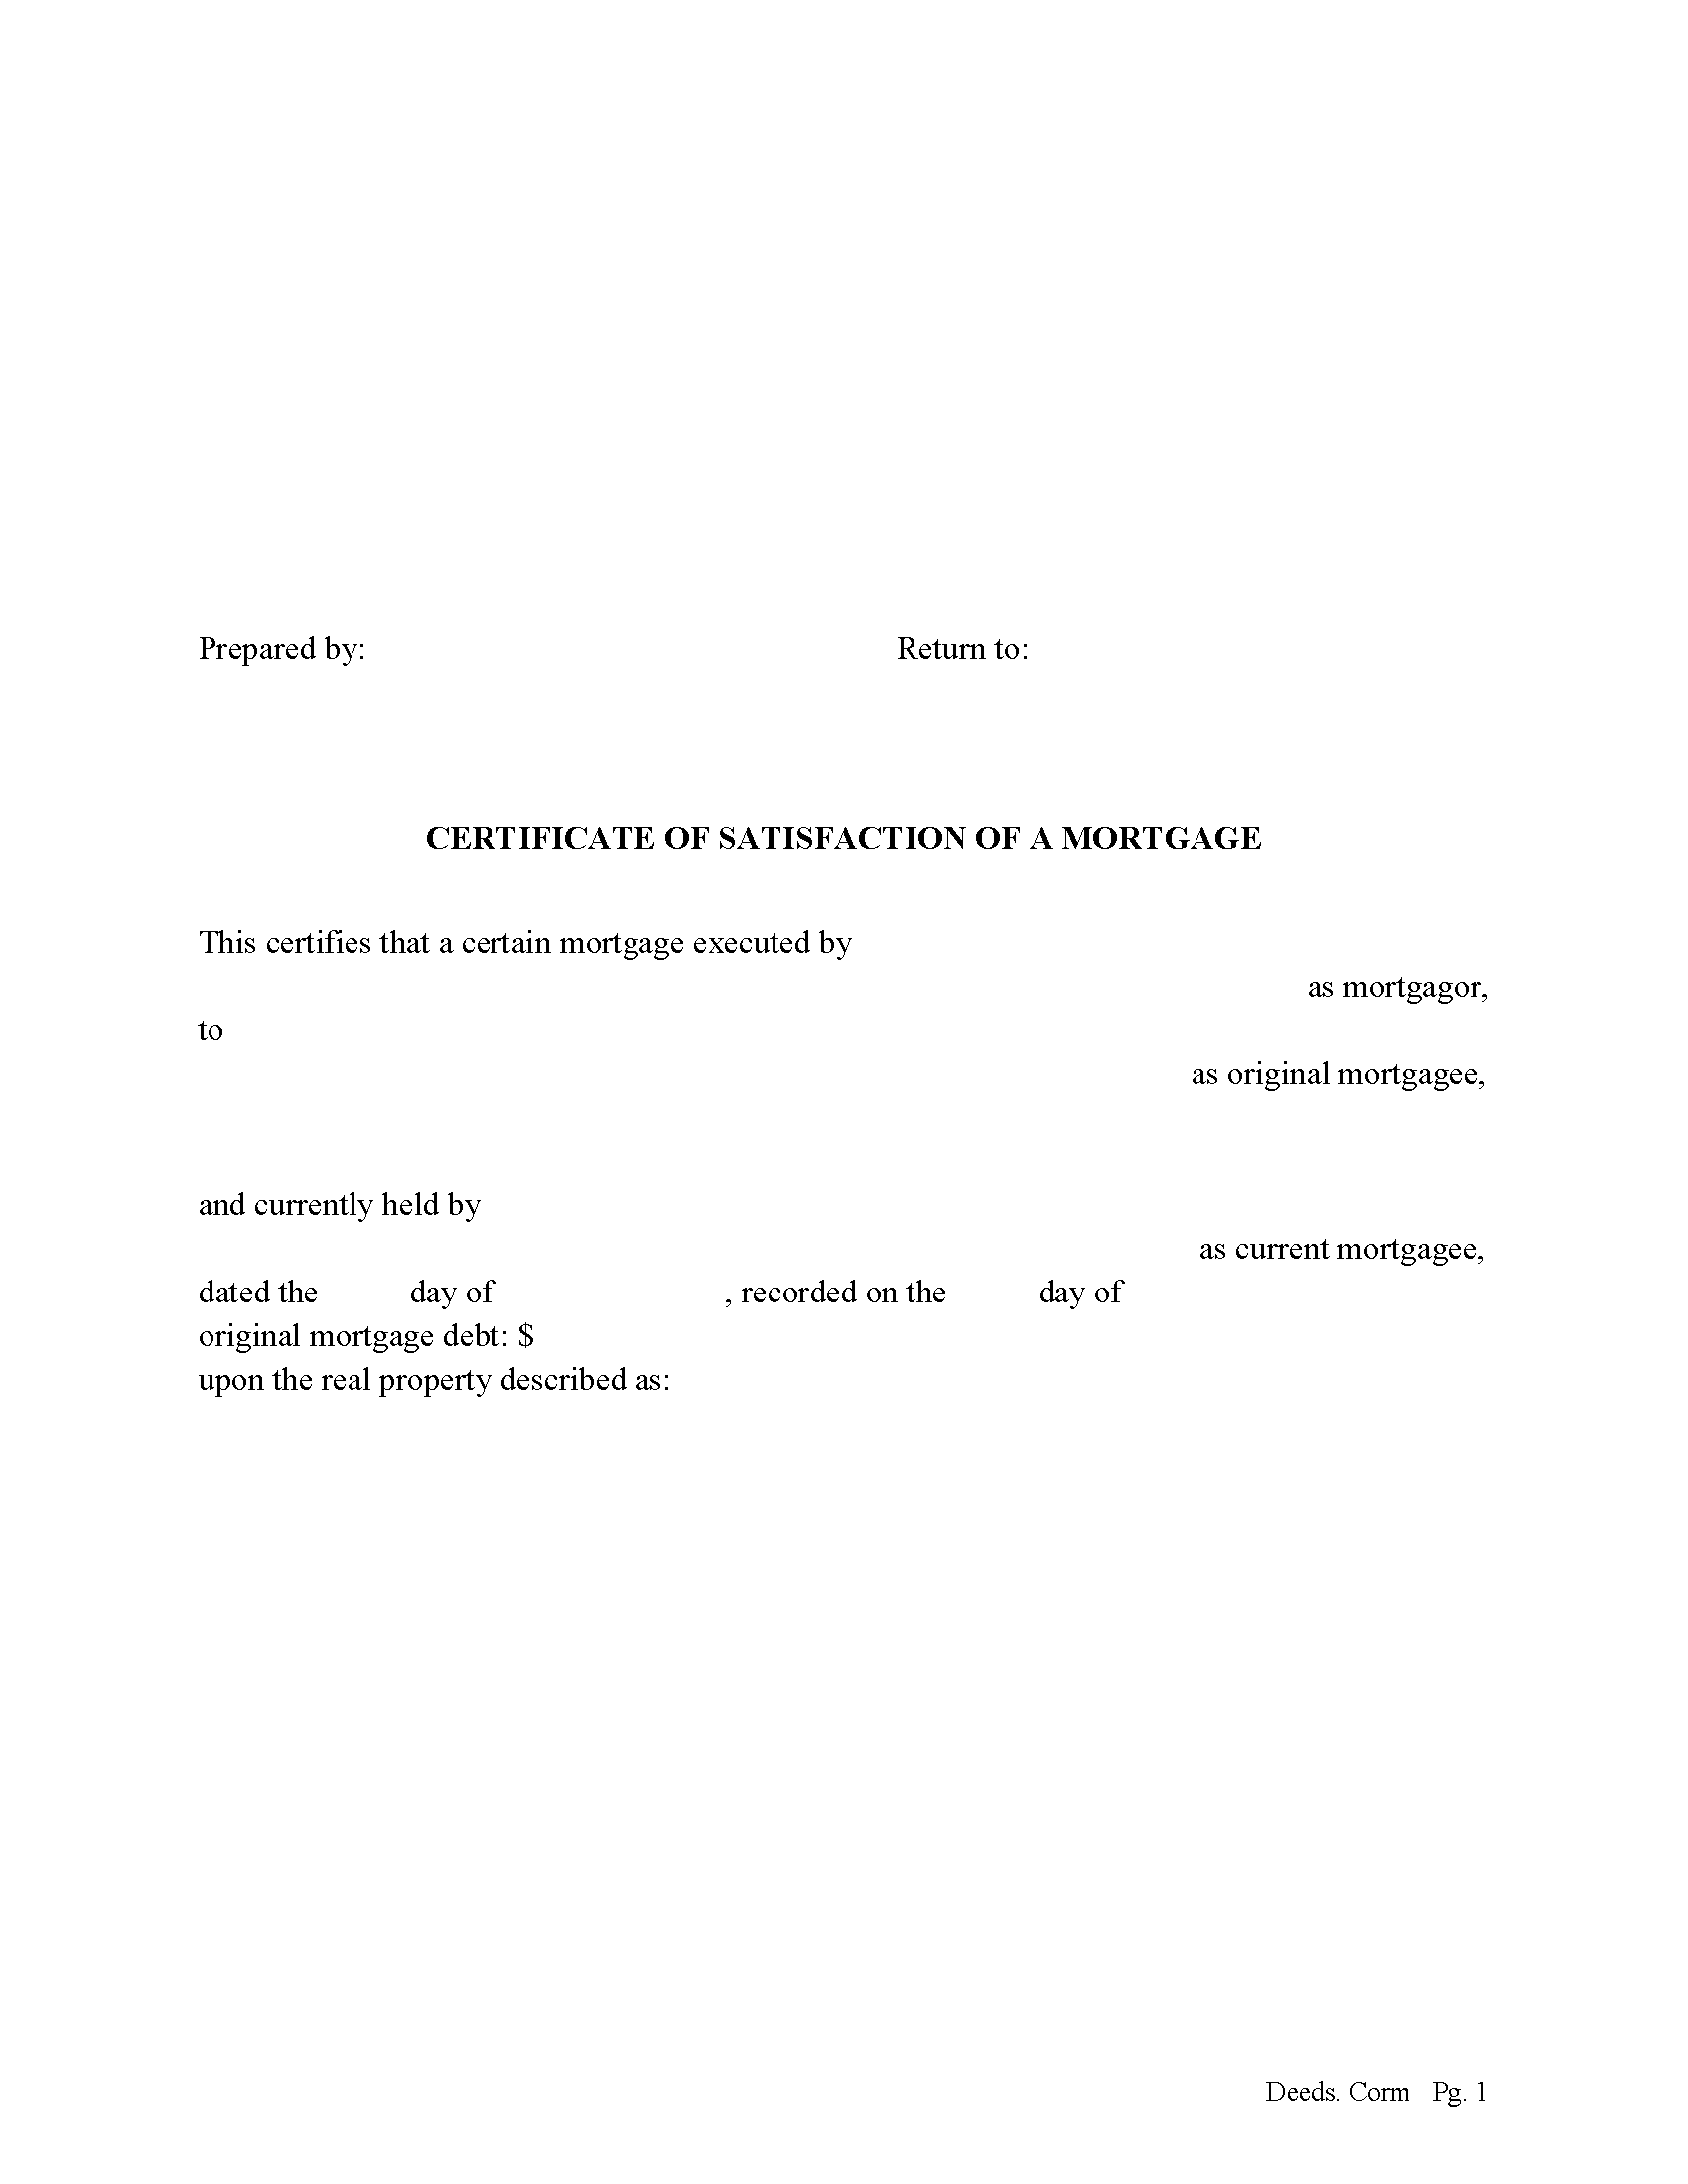 North Dakota Certificate of Discharge of a Mortgage Image